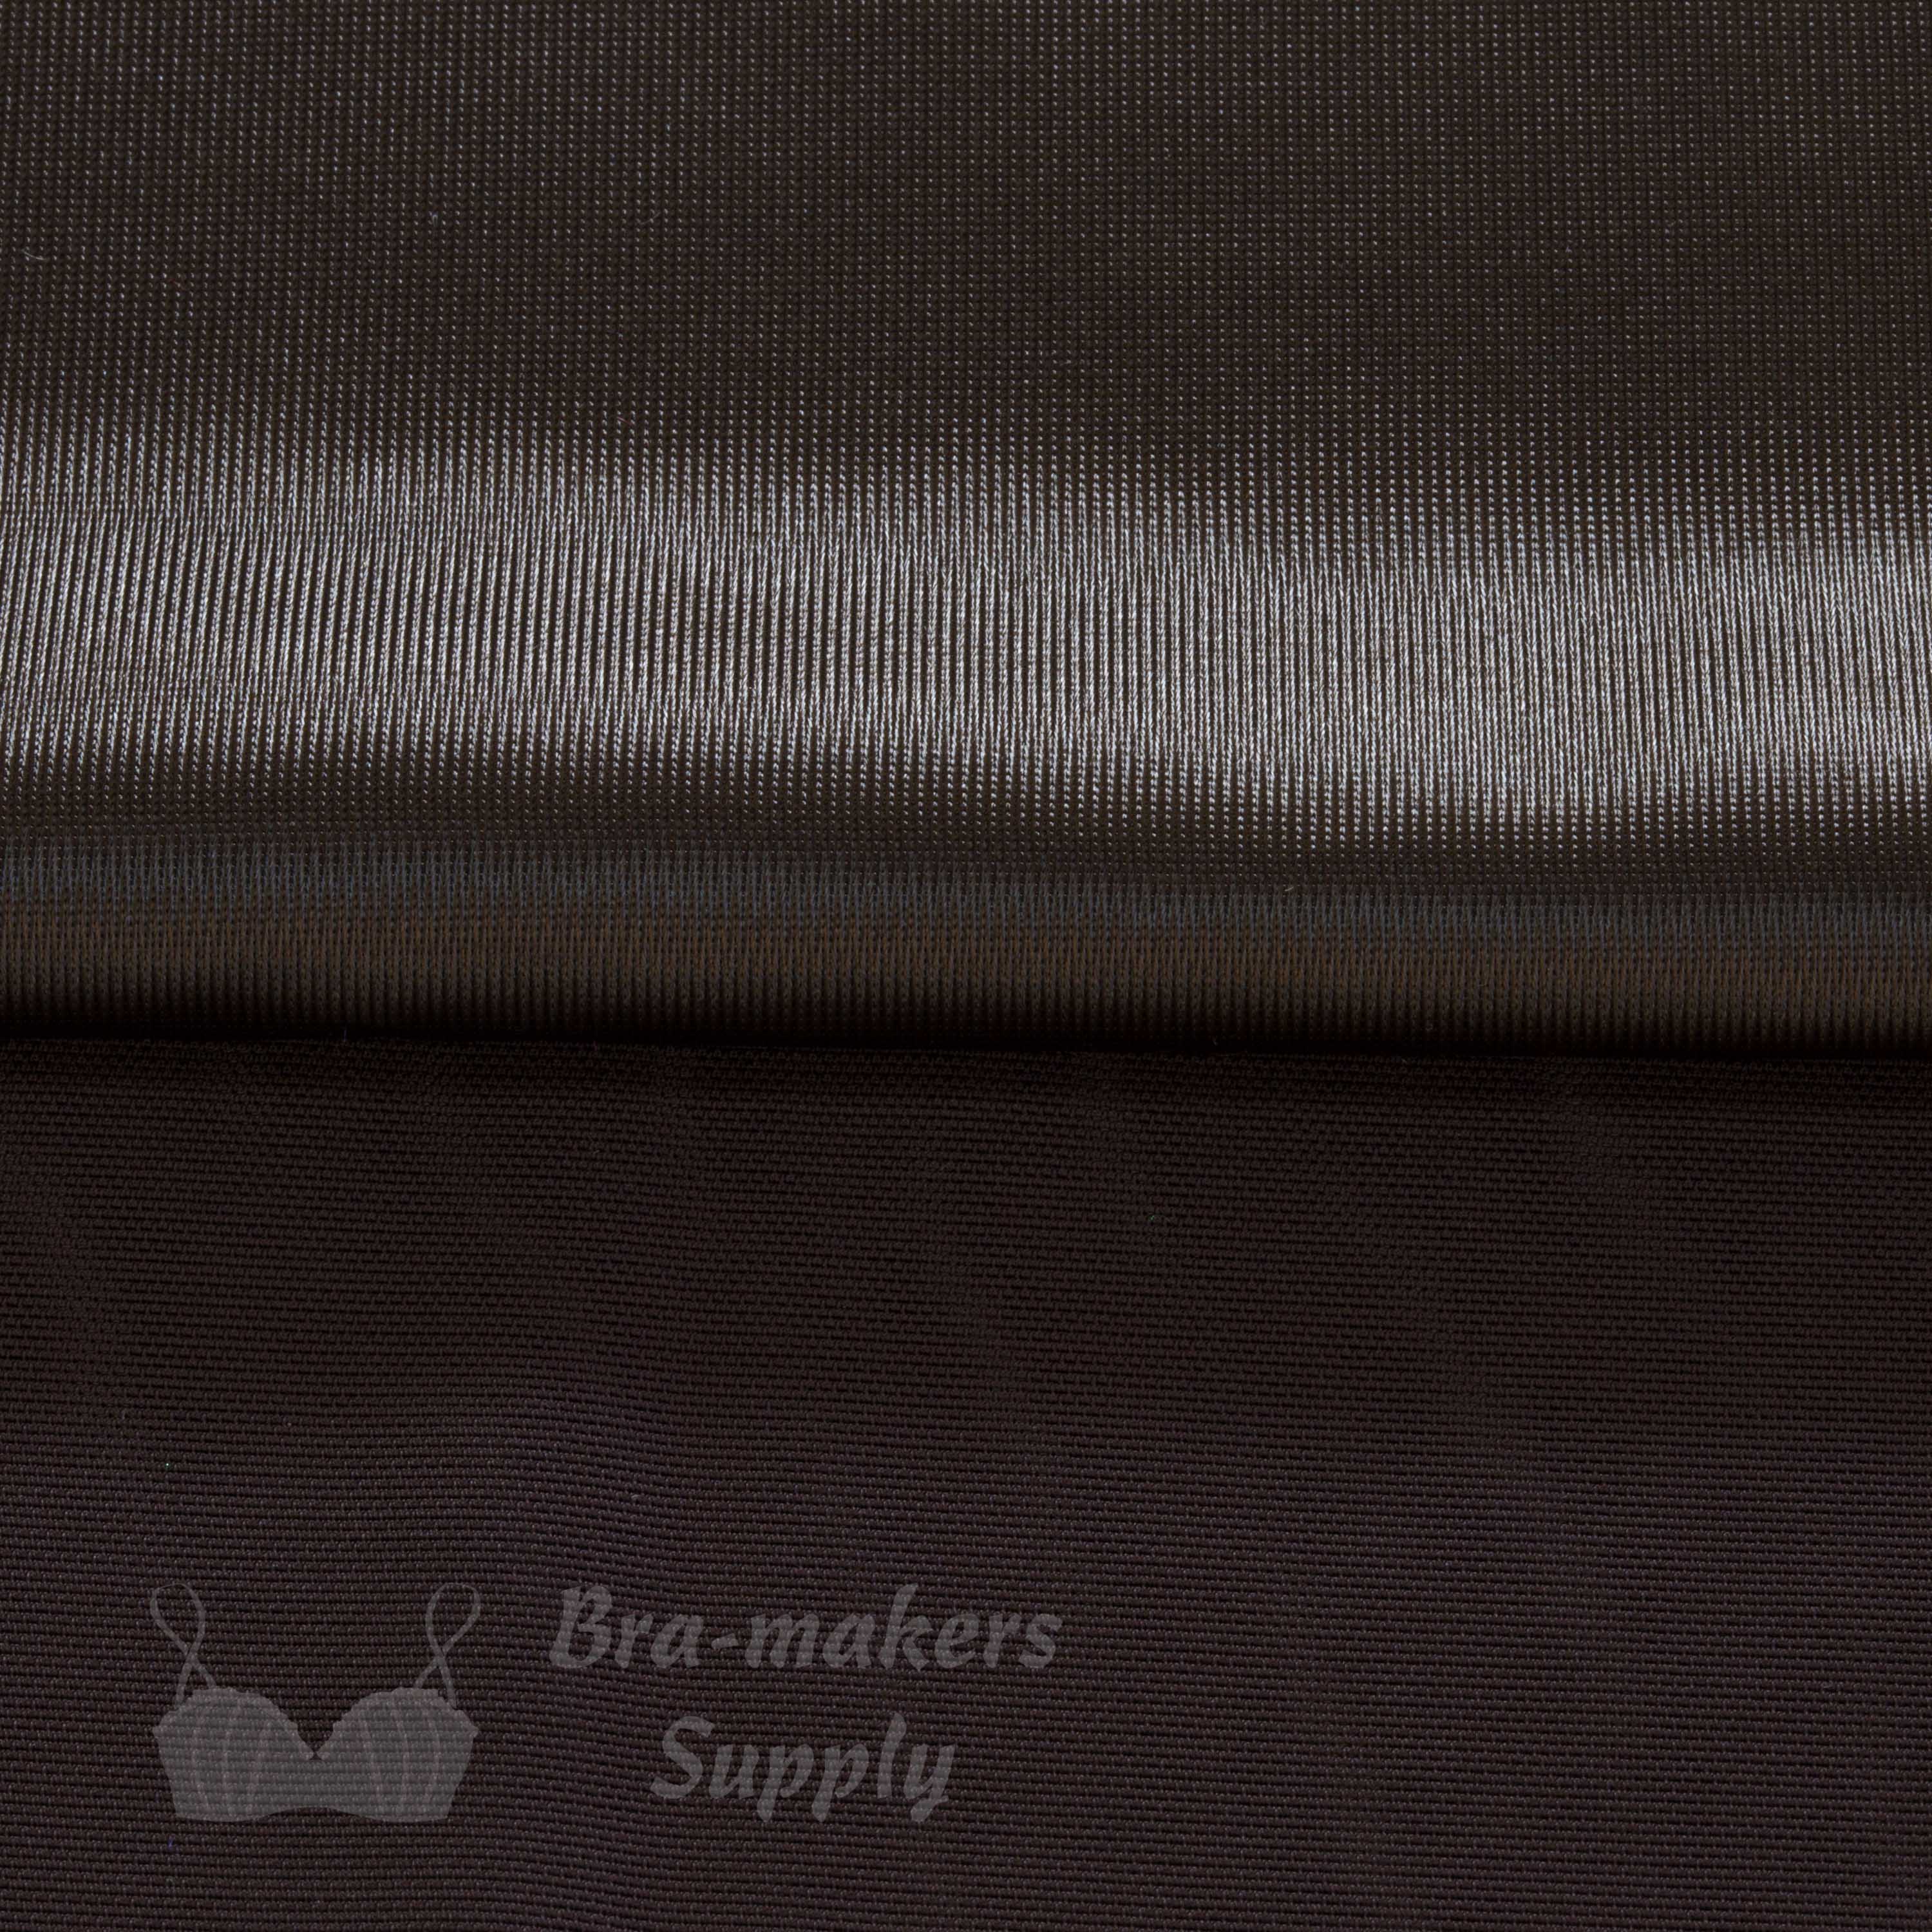 chocolate trio bra fabrics pack KT-85 from Bra-Makers Supply duoplex and power net shown